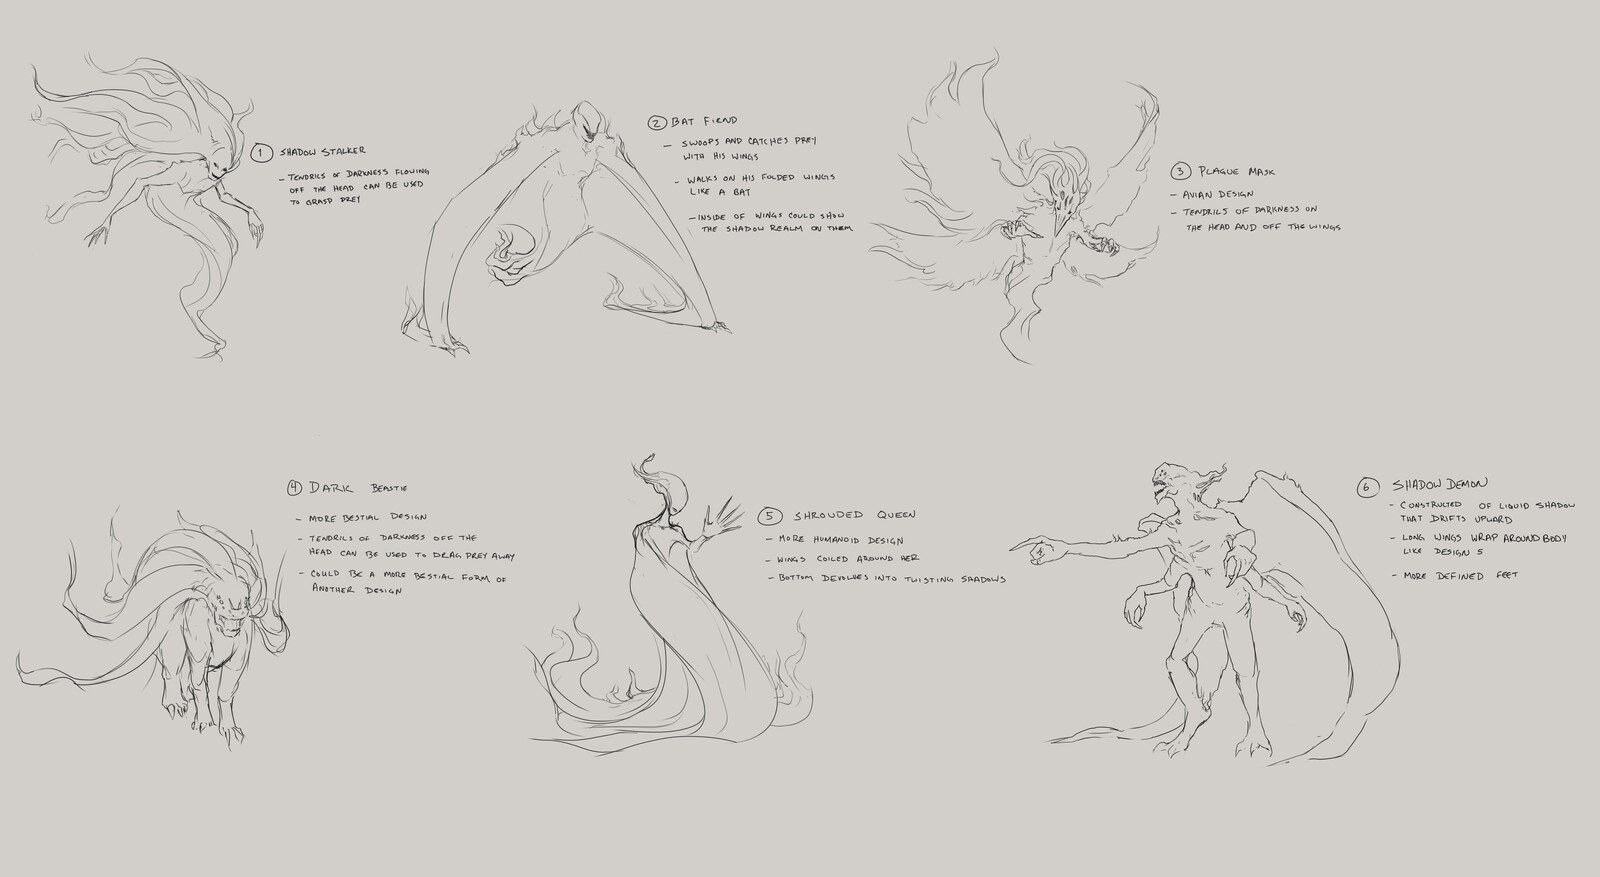 The original rough concept sketches I did at the oneset of the project were just throwing things at the wall to see what stuck. Although #1 became the base of the image, we pulled bits from basically all the other designs into the final.